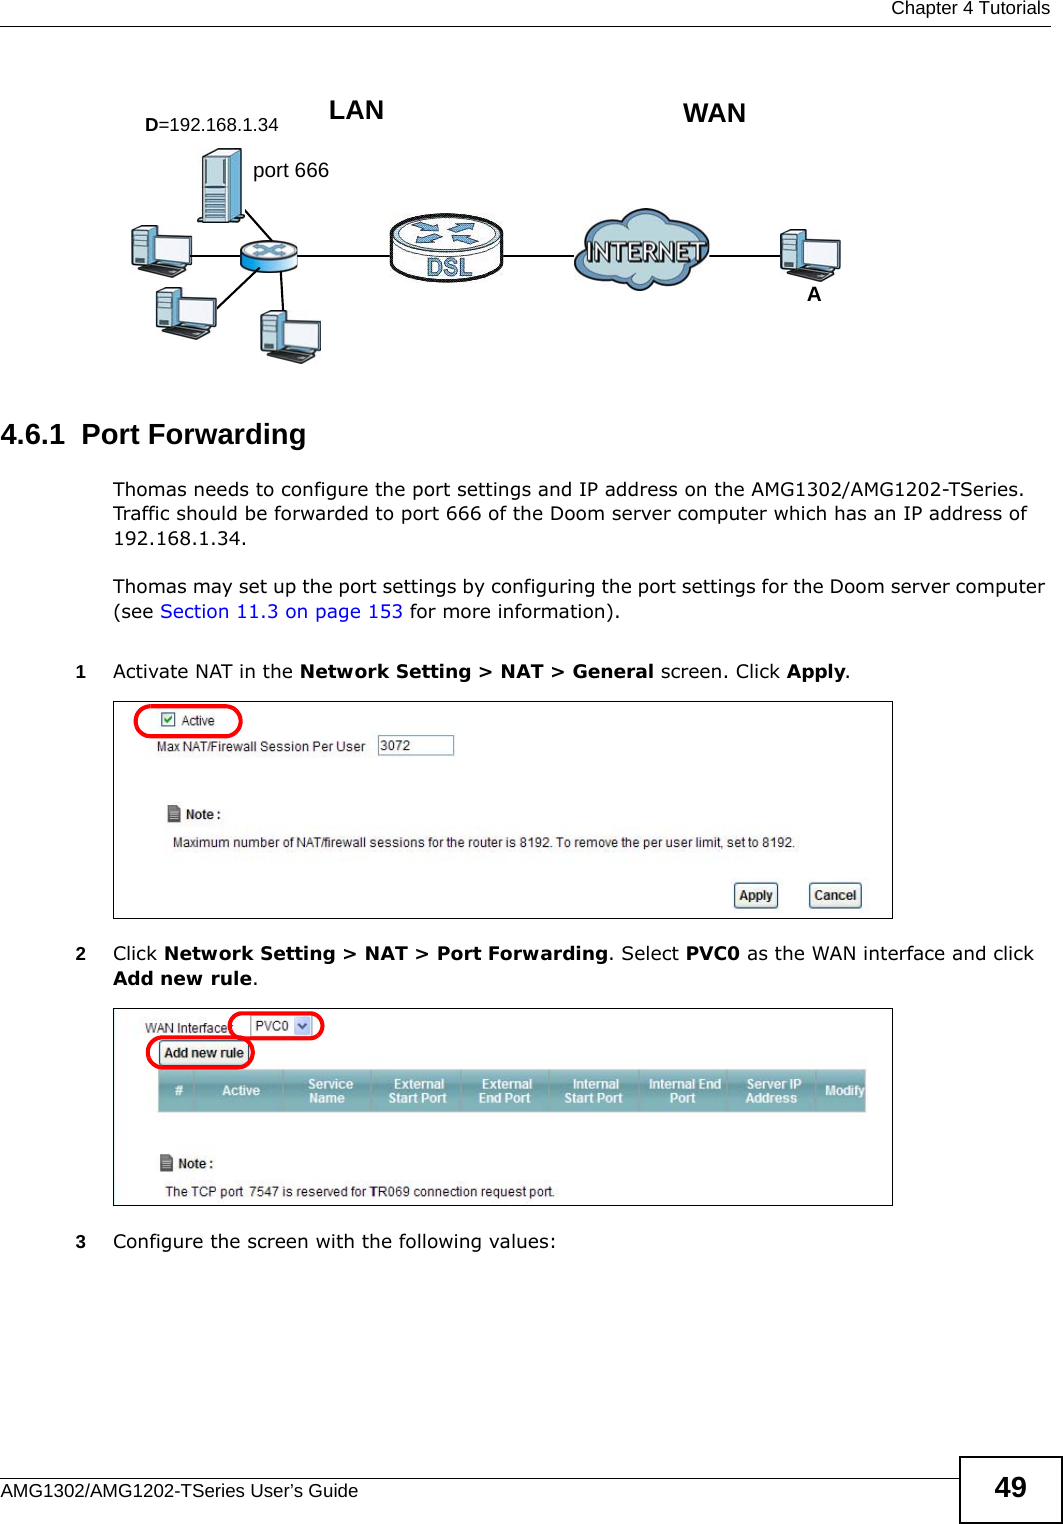  Chapter 4 TutorialsAMG1302/AMG1202-TSeries User’s Guide 49Tutorial: NAT Port Forwarding Setup 4.6.1  Port ForwardingThomas needs to configure the port settings and IP address on the AMG1302/AMG1202-TSeries. Traffic should be forwarded to port 666 of the Doom server computer which has an IP address of 192.168.1.34.Thomas may set up the port settings by configuring the port settings for the Doom server computer (see Section 11.3 on page 153 for more information).1Activate NAT in the Network Setting &gt; NAT &gt; General screen. Click Apply.2Click Network Setting &gt; NAT &gt; Port Forwarding. Select PVC0 as the WAN interface and click Add new rule.3Configure the screen with the following values:D=192.168.1.34 WANLANport 666A